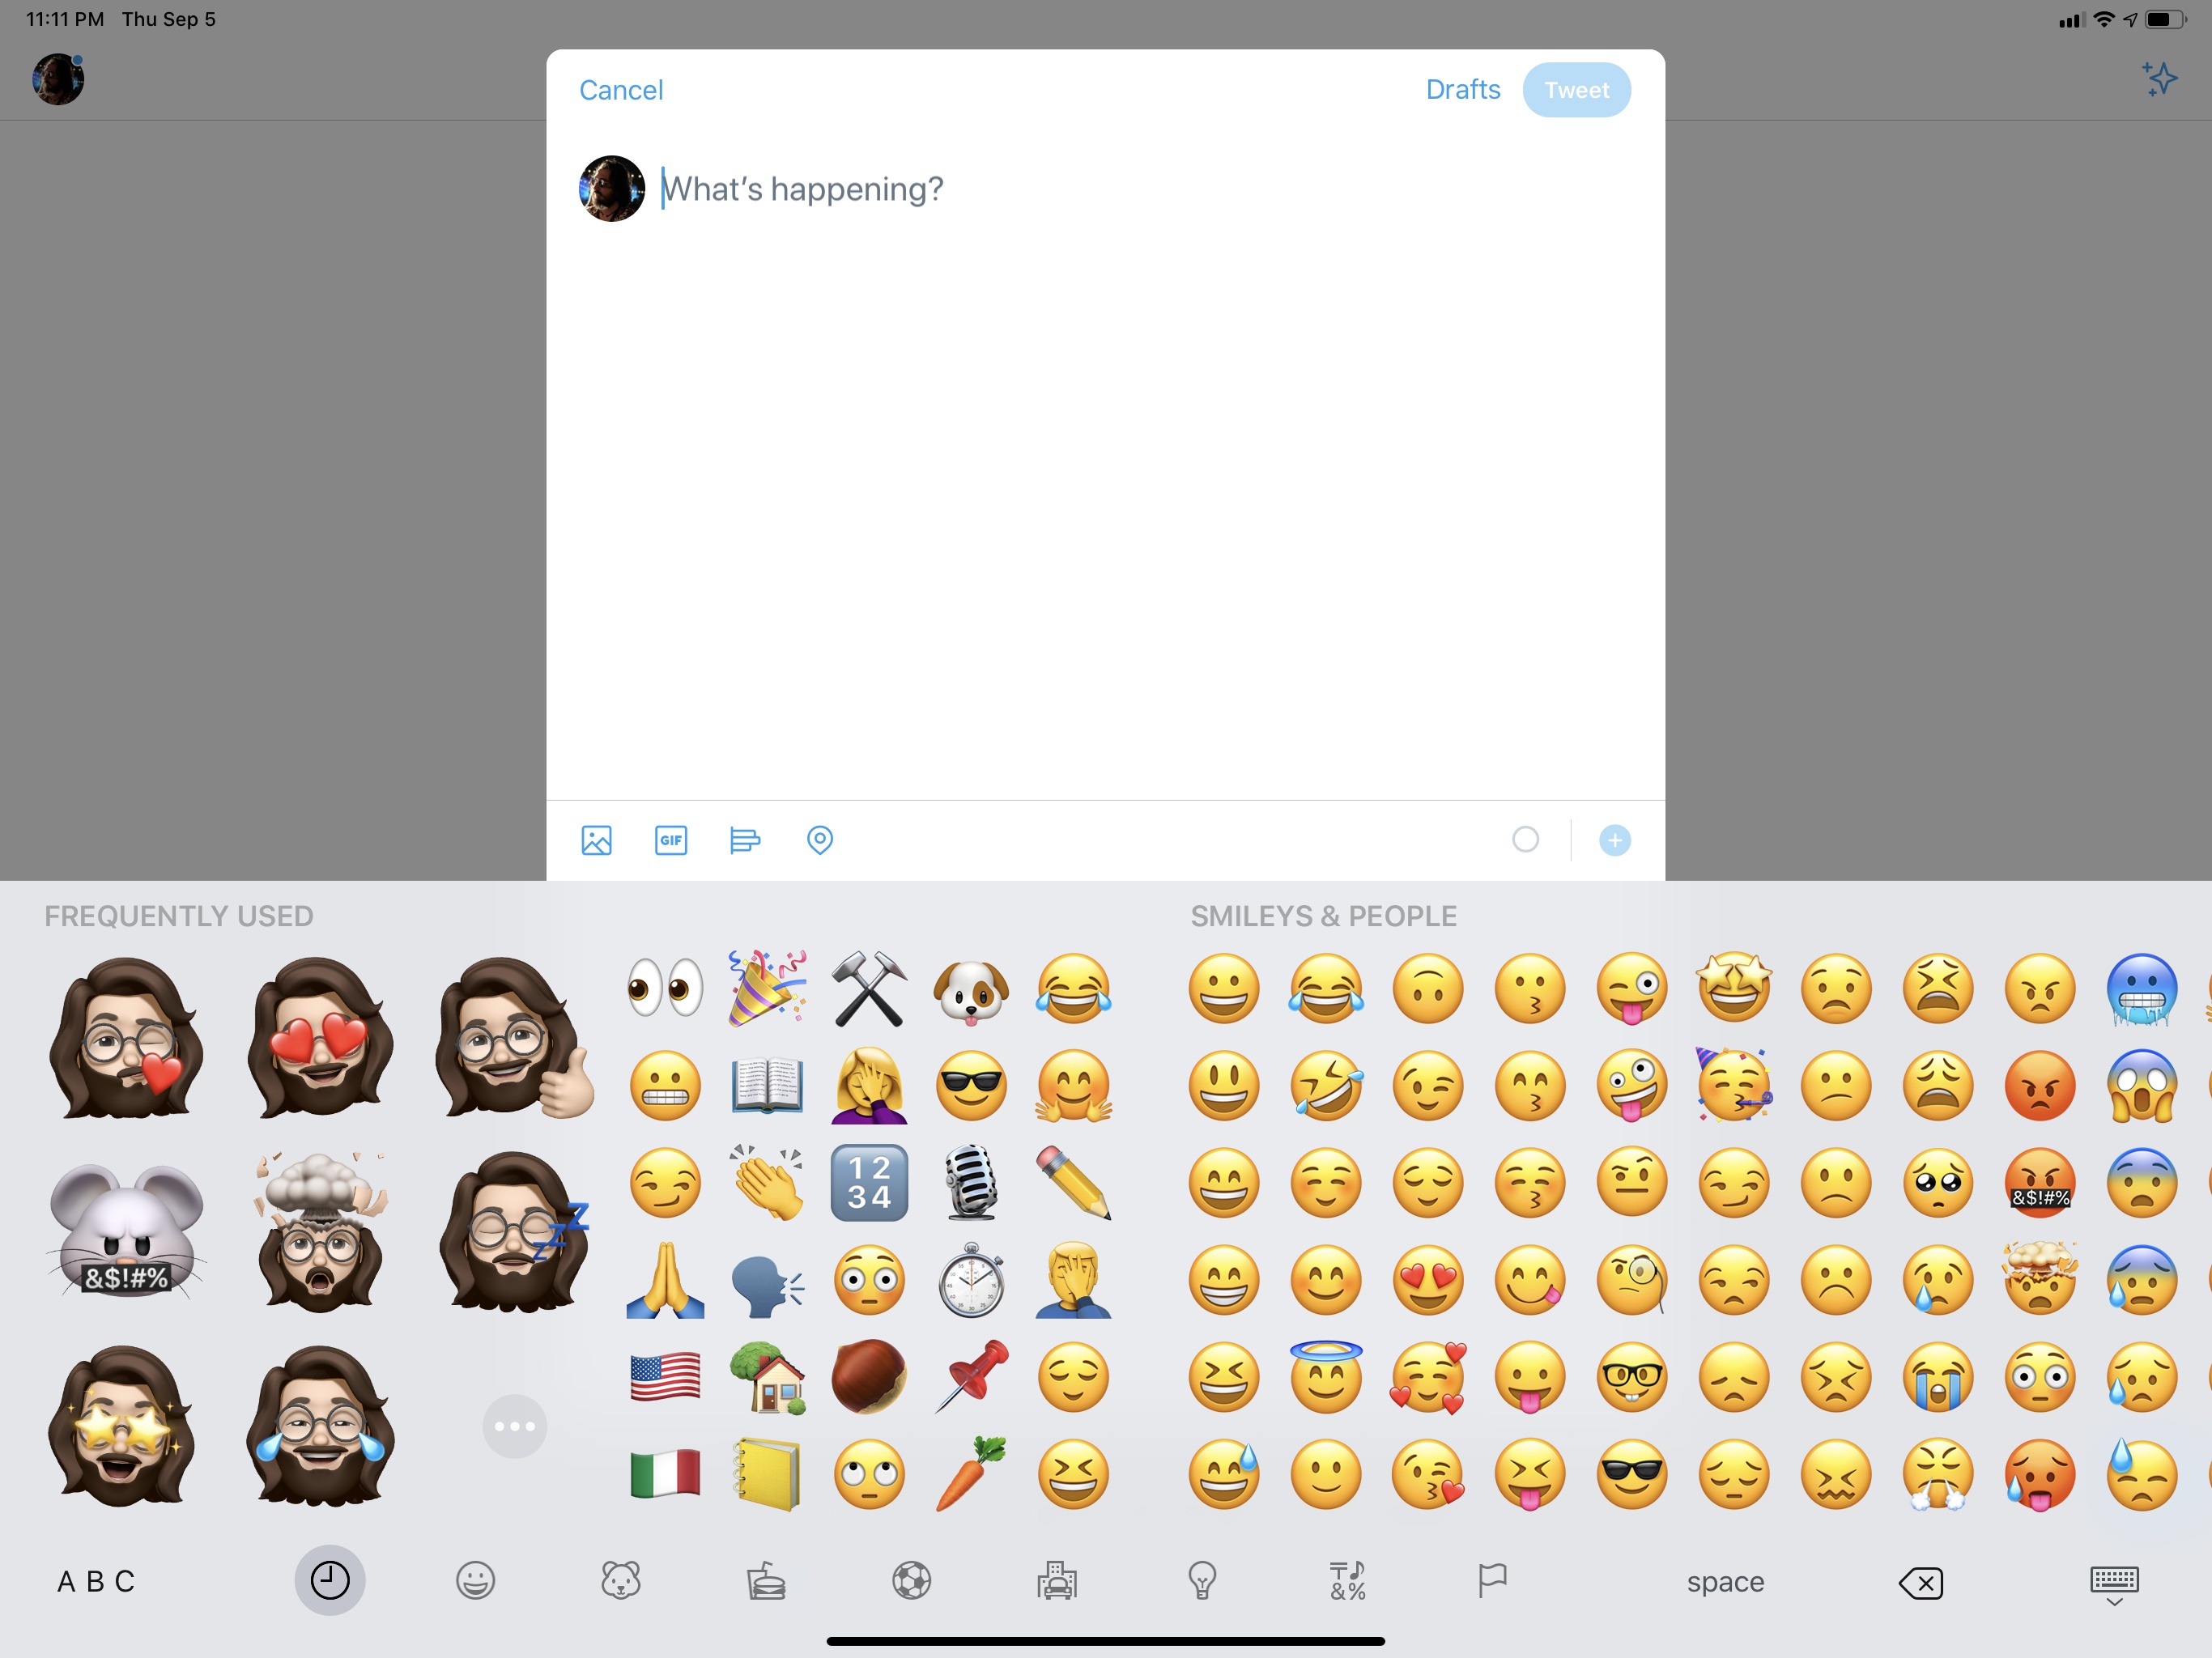 A selection of Memoji stickers are available on the left side of the standard emoji keyboard.